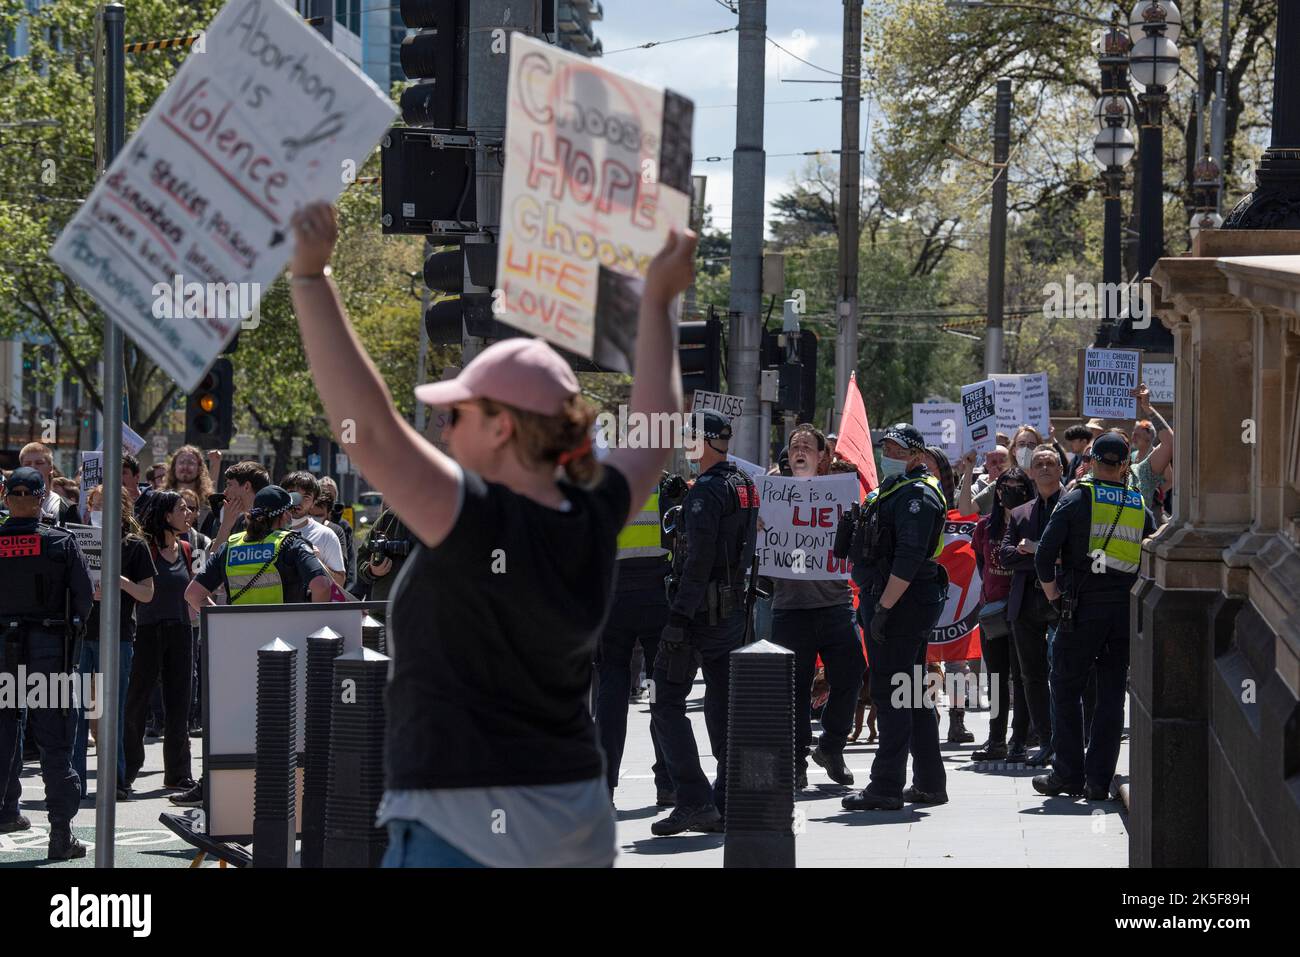 October 8th, 2022, Melbourne, Australia. An anti-abortion protester holds up signs at a pro-abortion counter-rally in response to MP Bernie Finn's March for the Babies, which happens annually. Credit: Jay Kogler/Alamy Live News Stock Photo